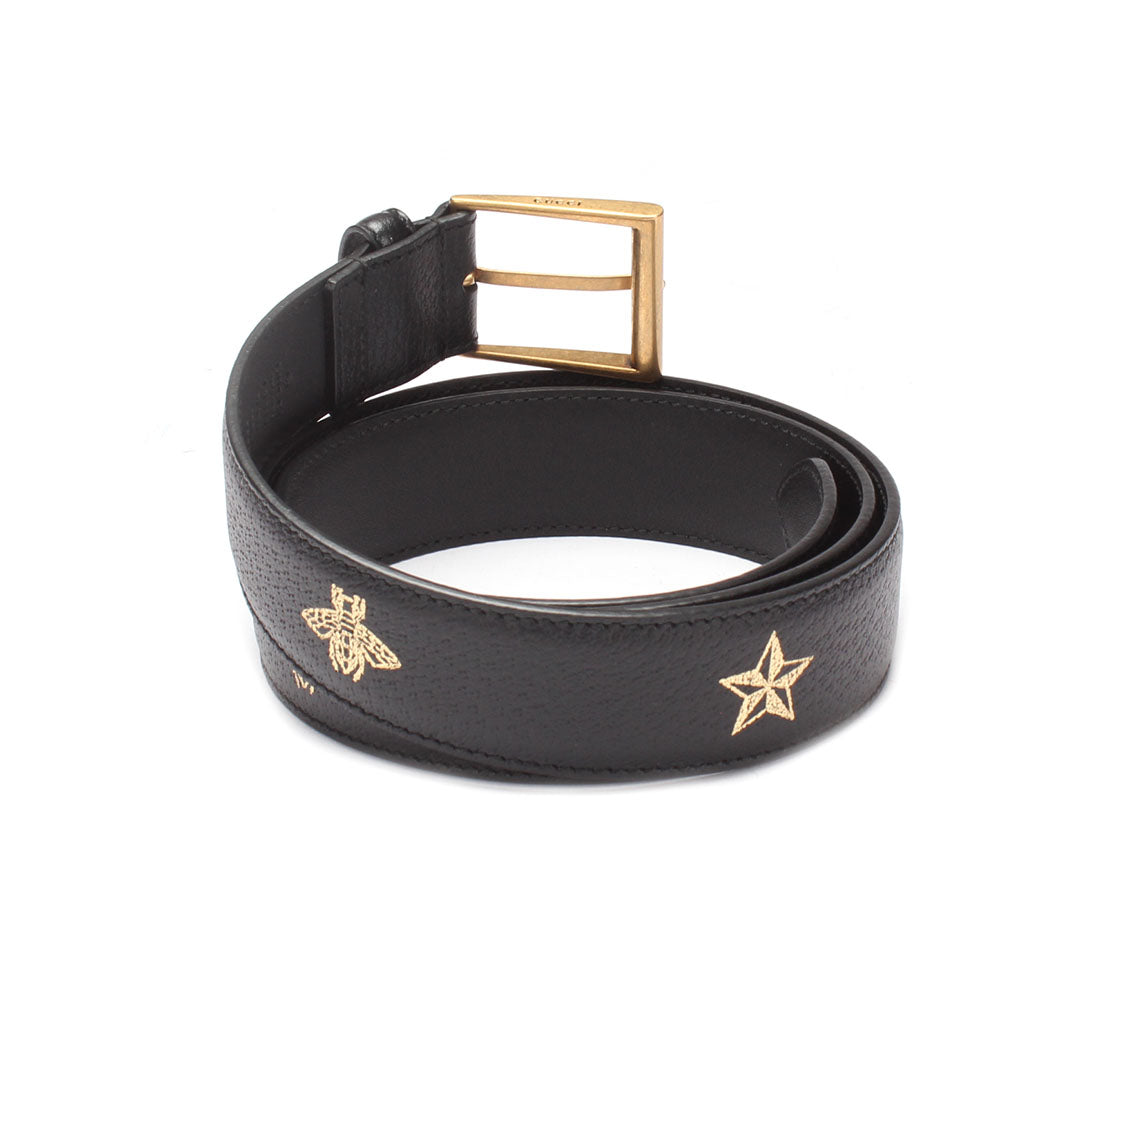 Leather Bees and Stars Belt